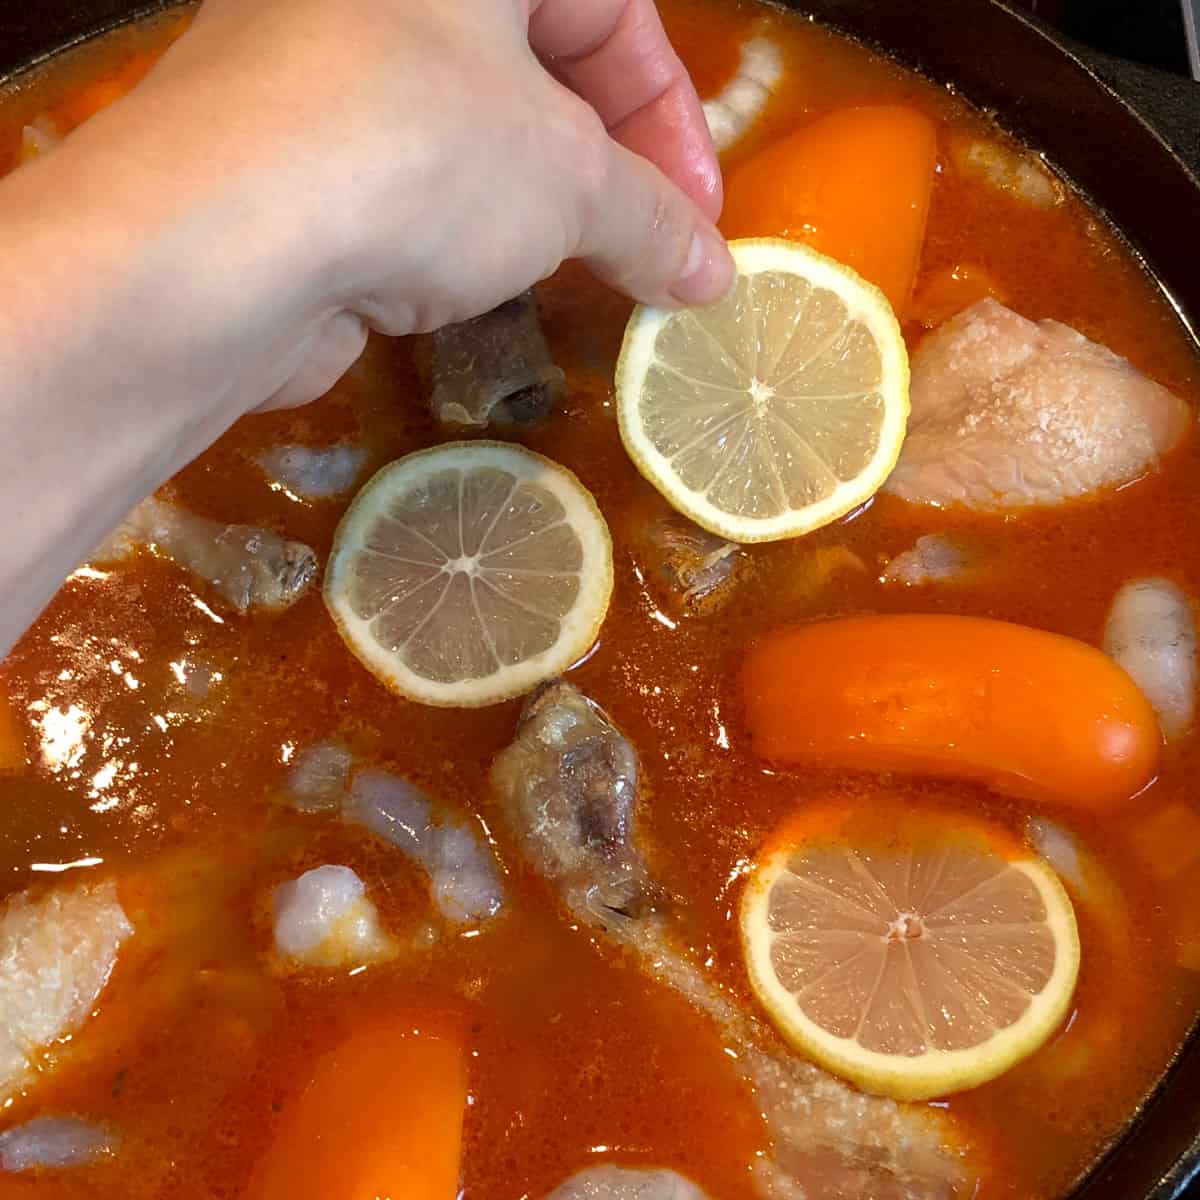 A picture of a recipe step - laying lemon slices on top of paella ingredients.